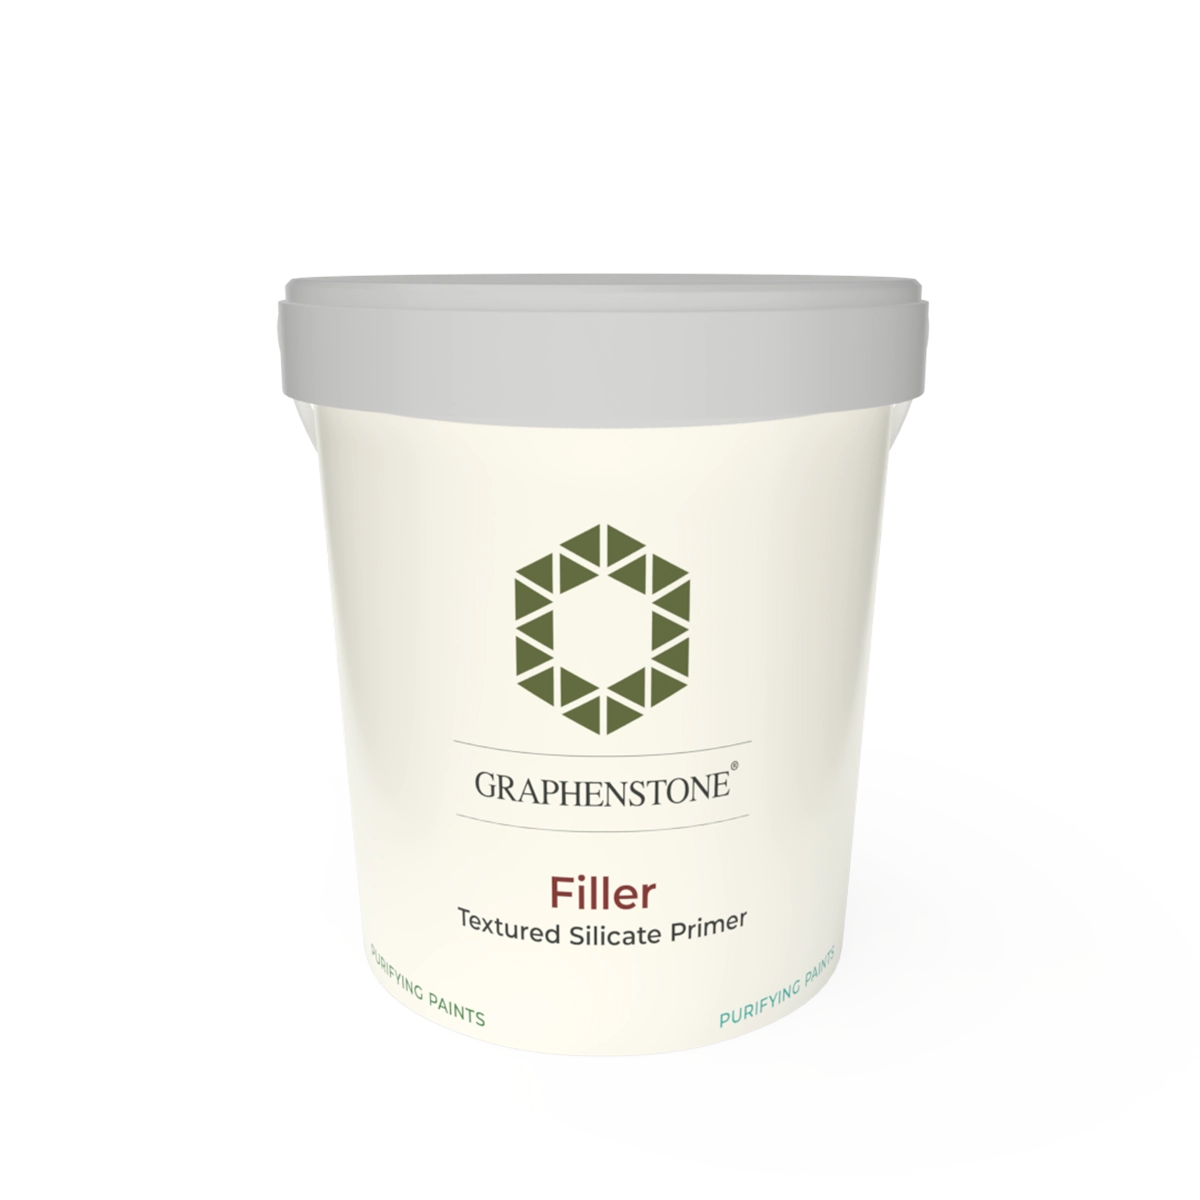 Filler – Regulates surface texture and covers small cracks